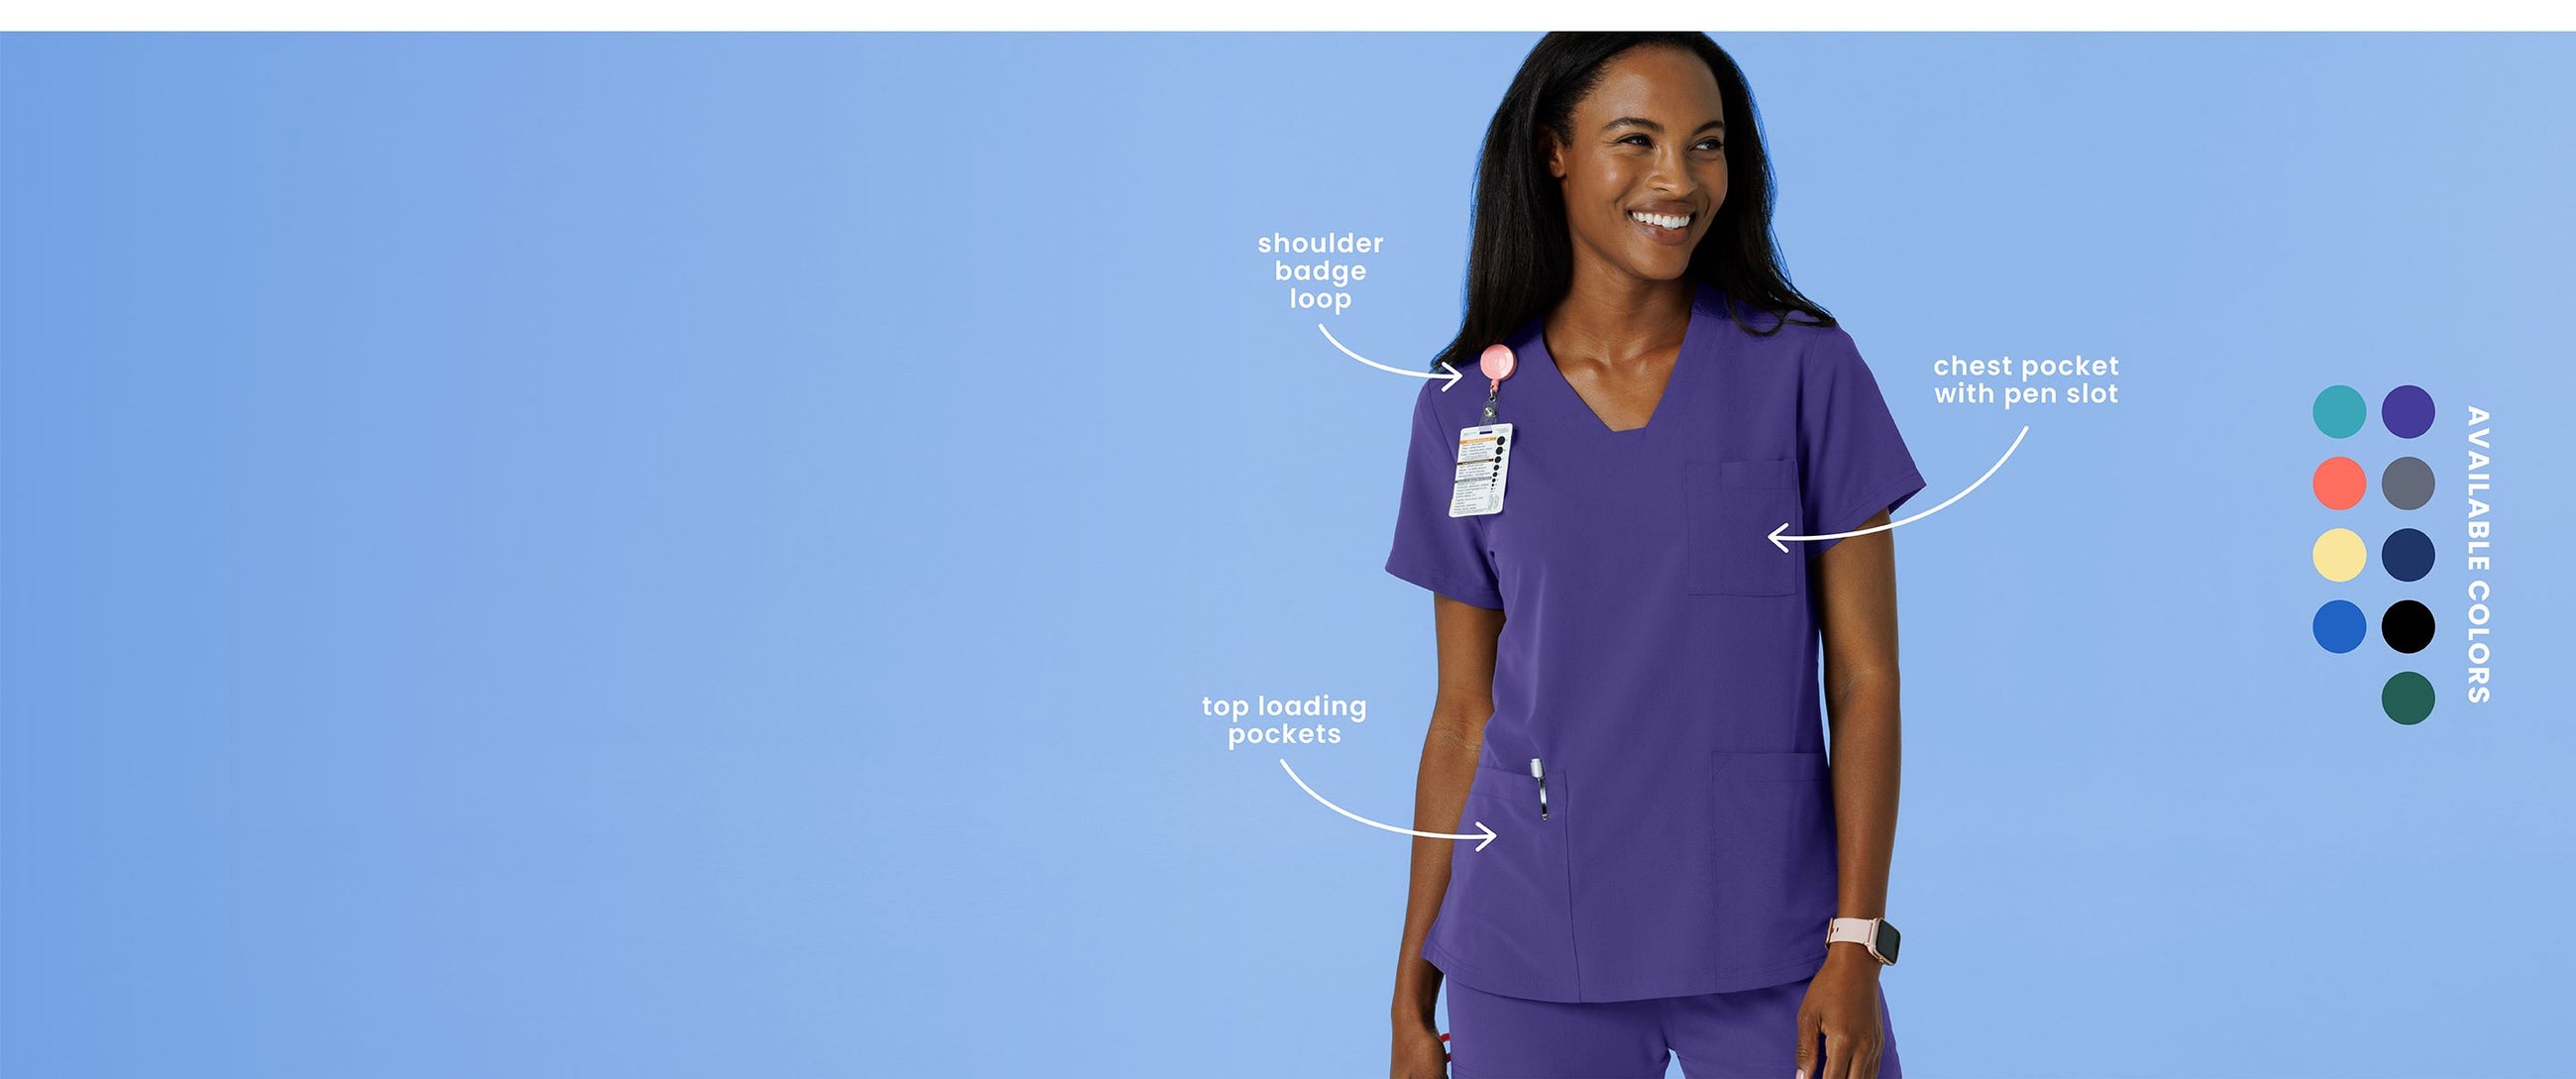 "shoulder badge loop" "chest pocket with pen slot" "top loading pockets" "Available Colors" Woman in Purple Wink NOVA Scrubs